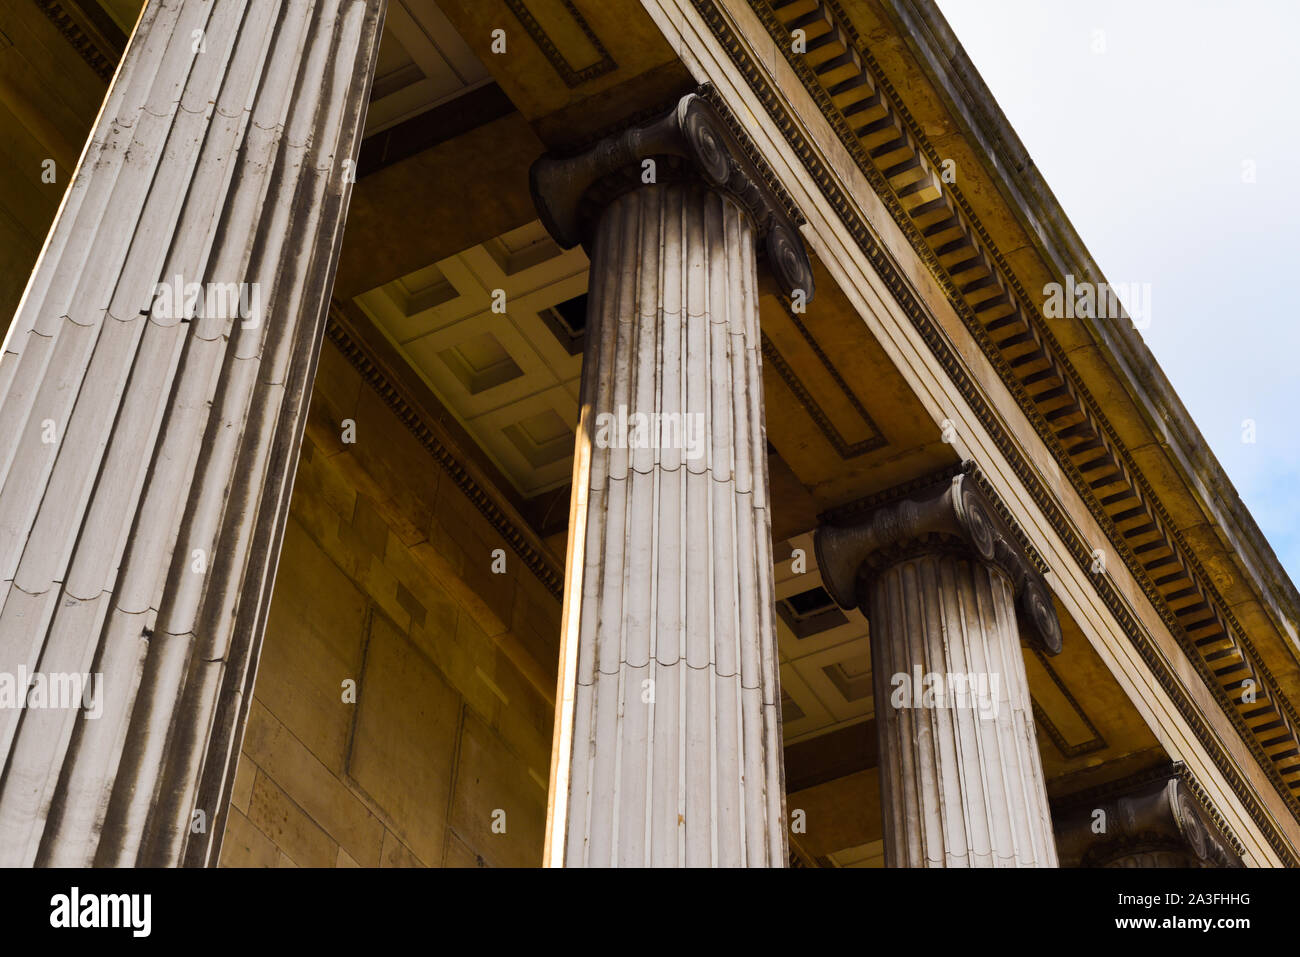 Columns on the exterior of a historic building with detailed stone work Stock Photo